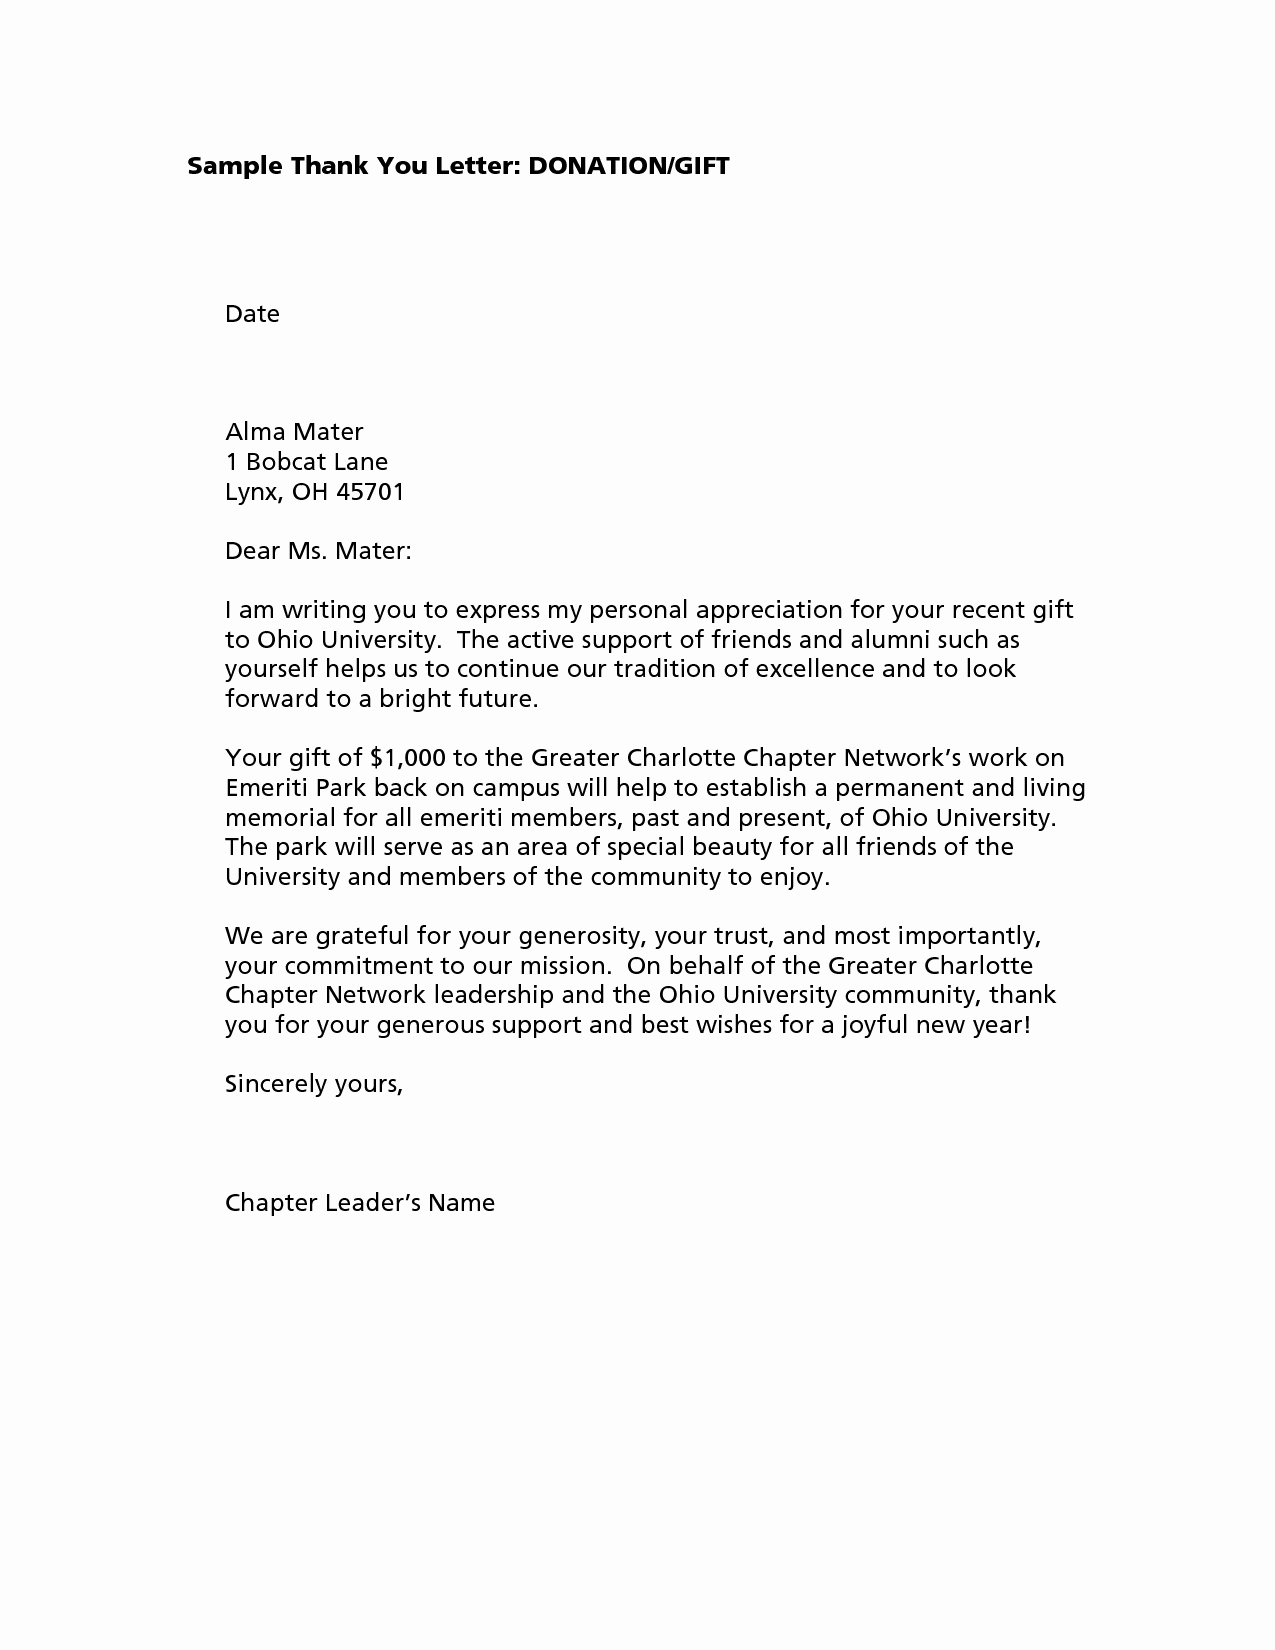 Mission Trip Fundraising Letter Template Best Of Travel Fundraising Letter Sample Fundraising Support